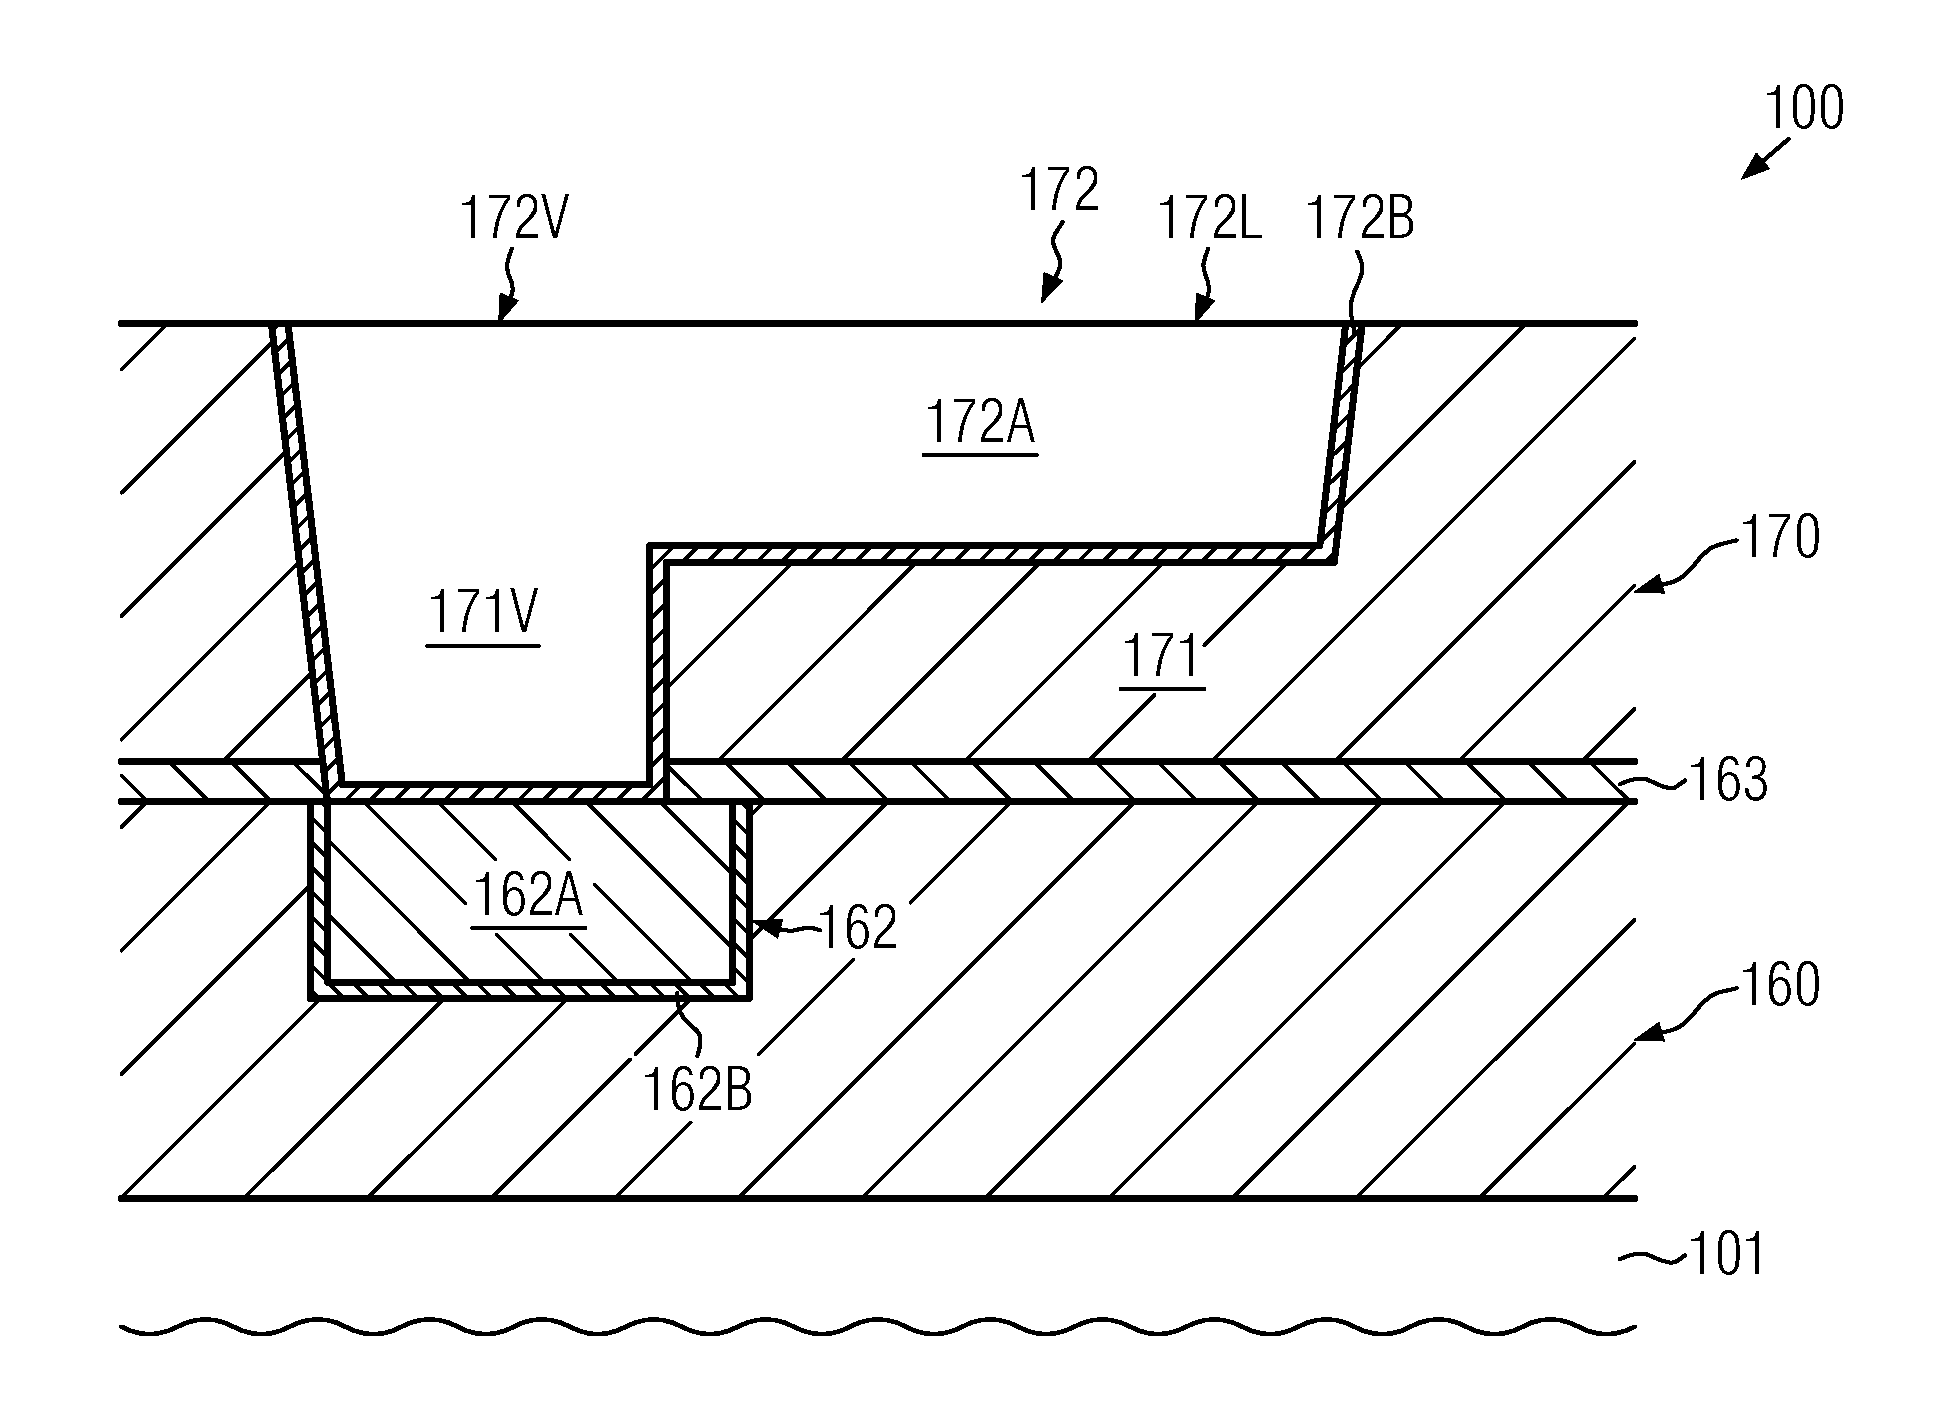 Metallization Systems of Semiconductor Devices Comprising a Copper/Silicon Compound as a Barrier Material